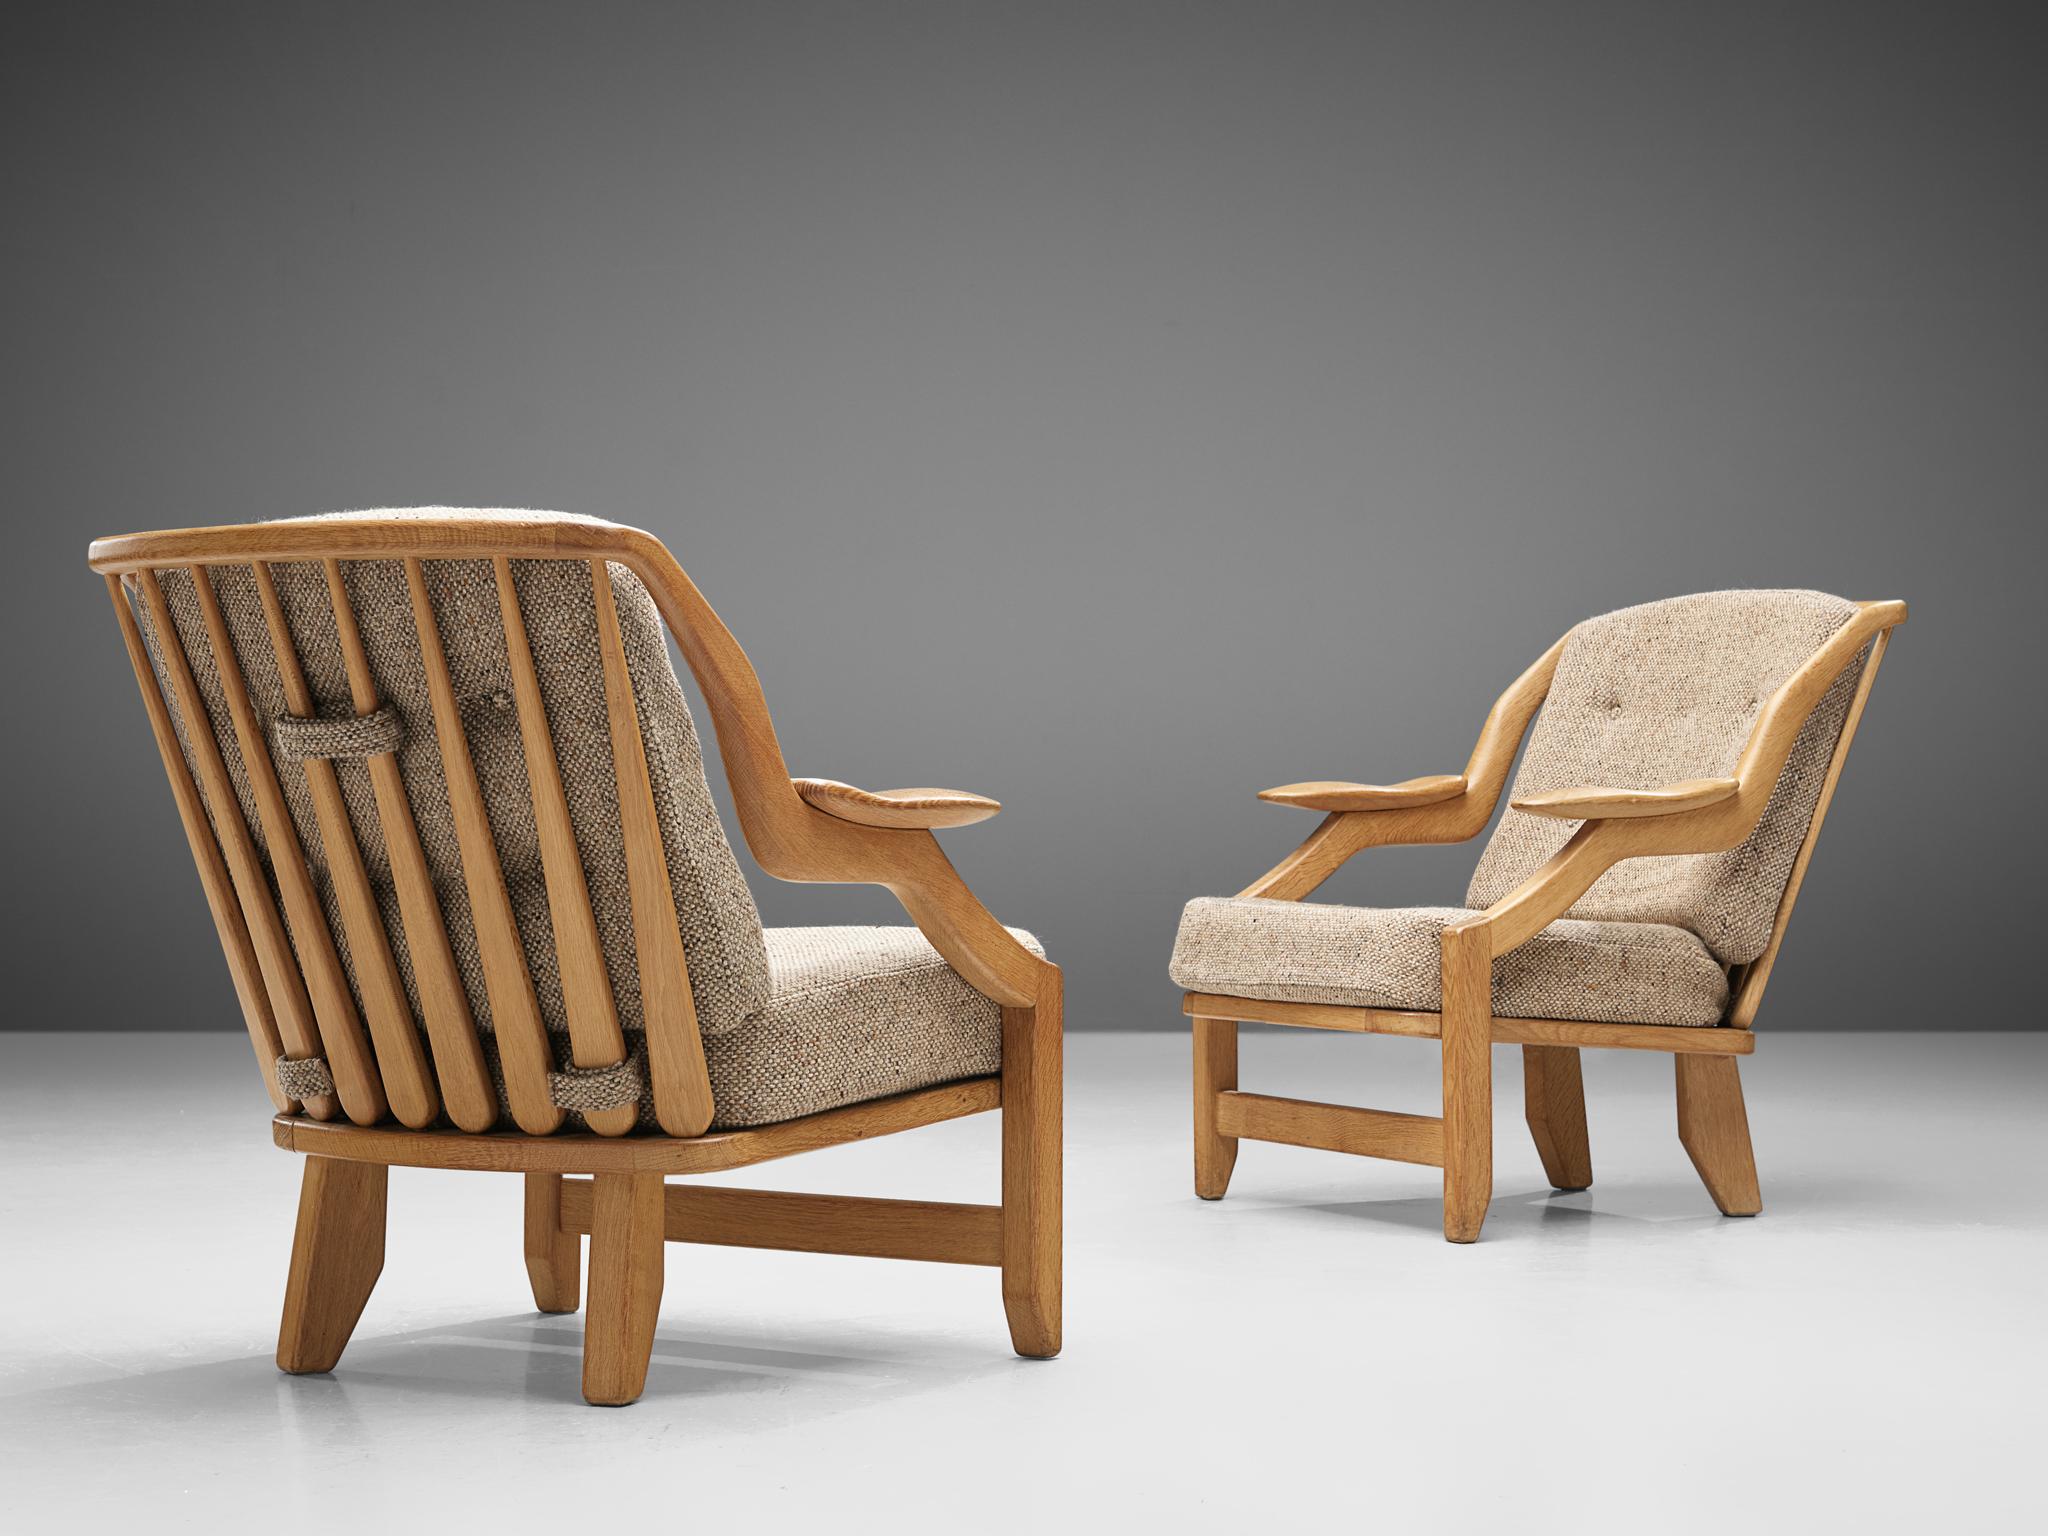 Guillerme & Chambron, lounge chairs in light gray tweed fabric and oak, France 1950s.

This French designer duo is known for their extreme high quality solid oak furniture, from which this set is another great example. These chairs have a very